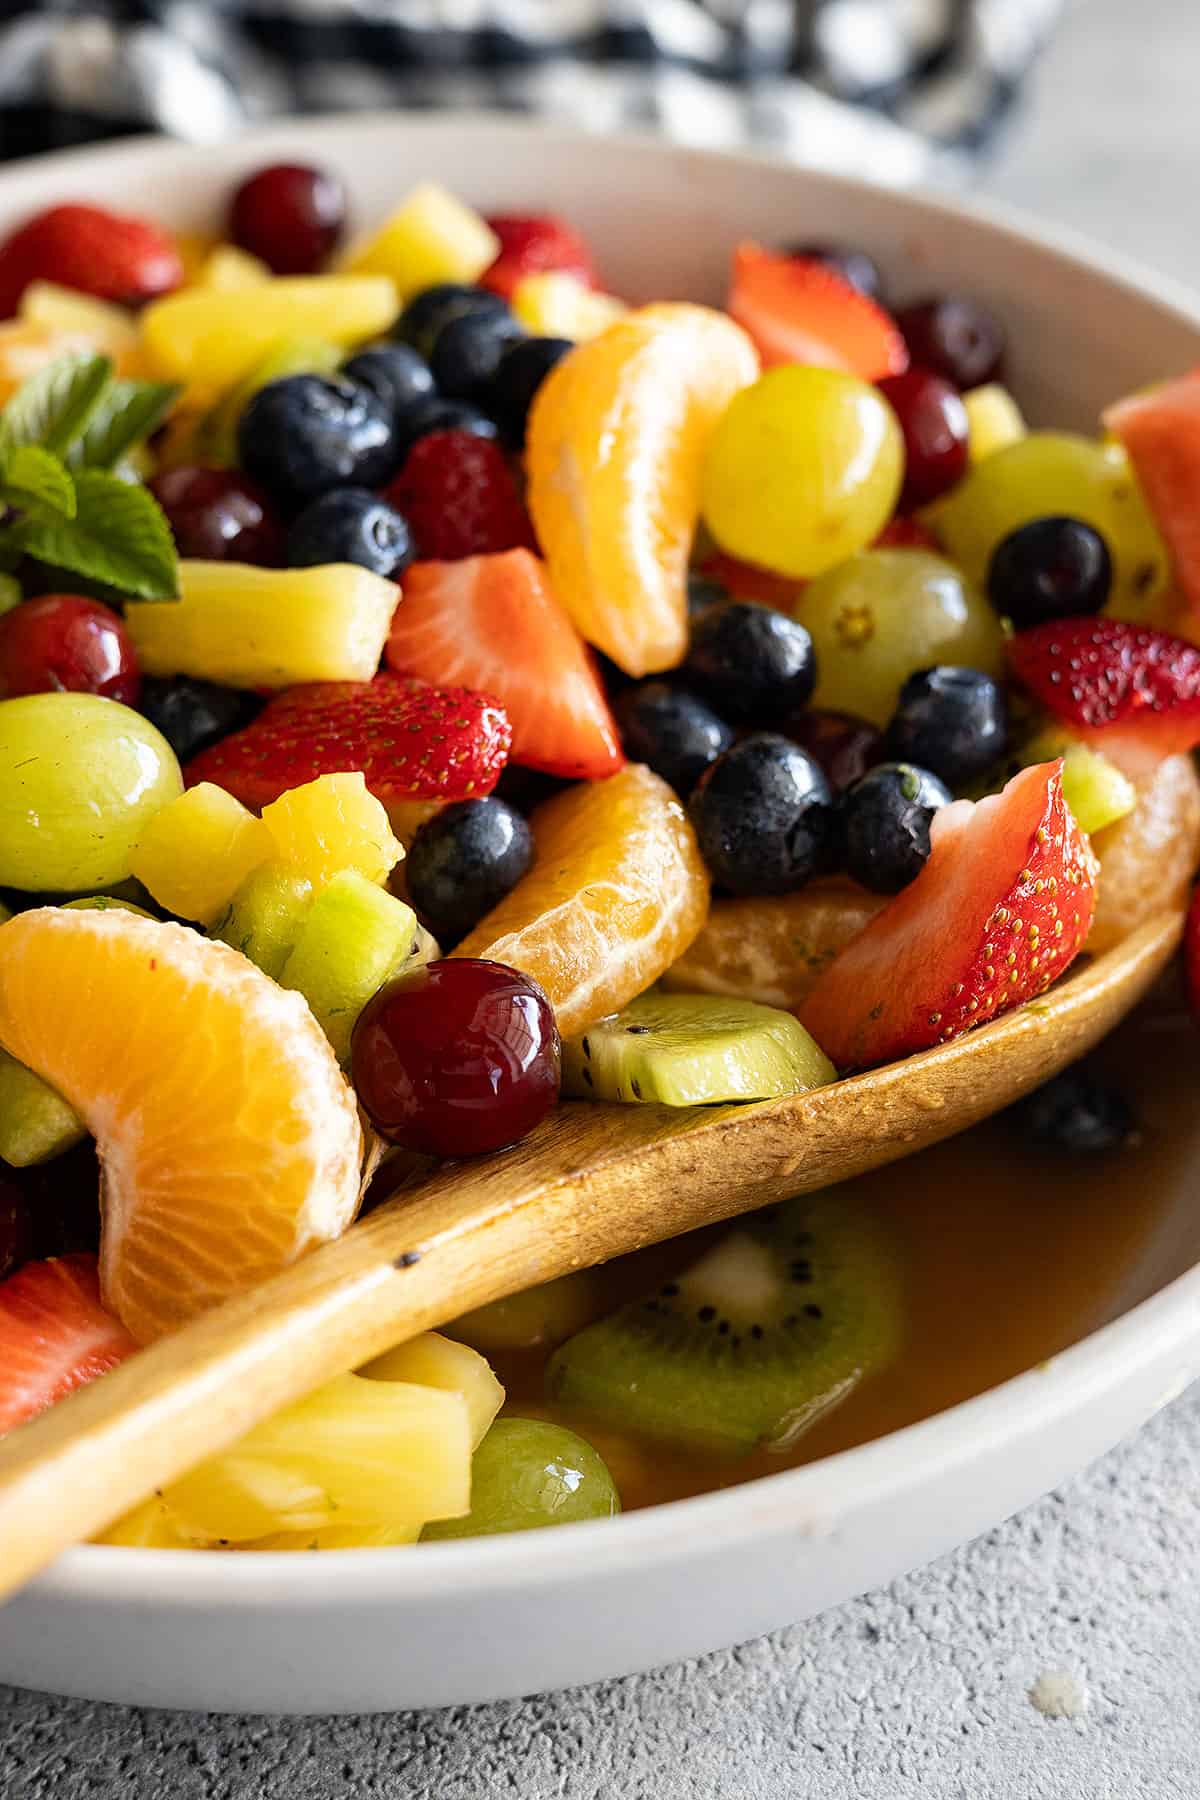 Fruit salad in a cream bowl with spoon off to the side ready to scoop up some fruit salad.